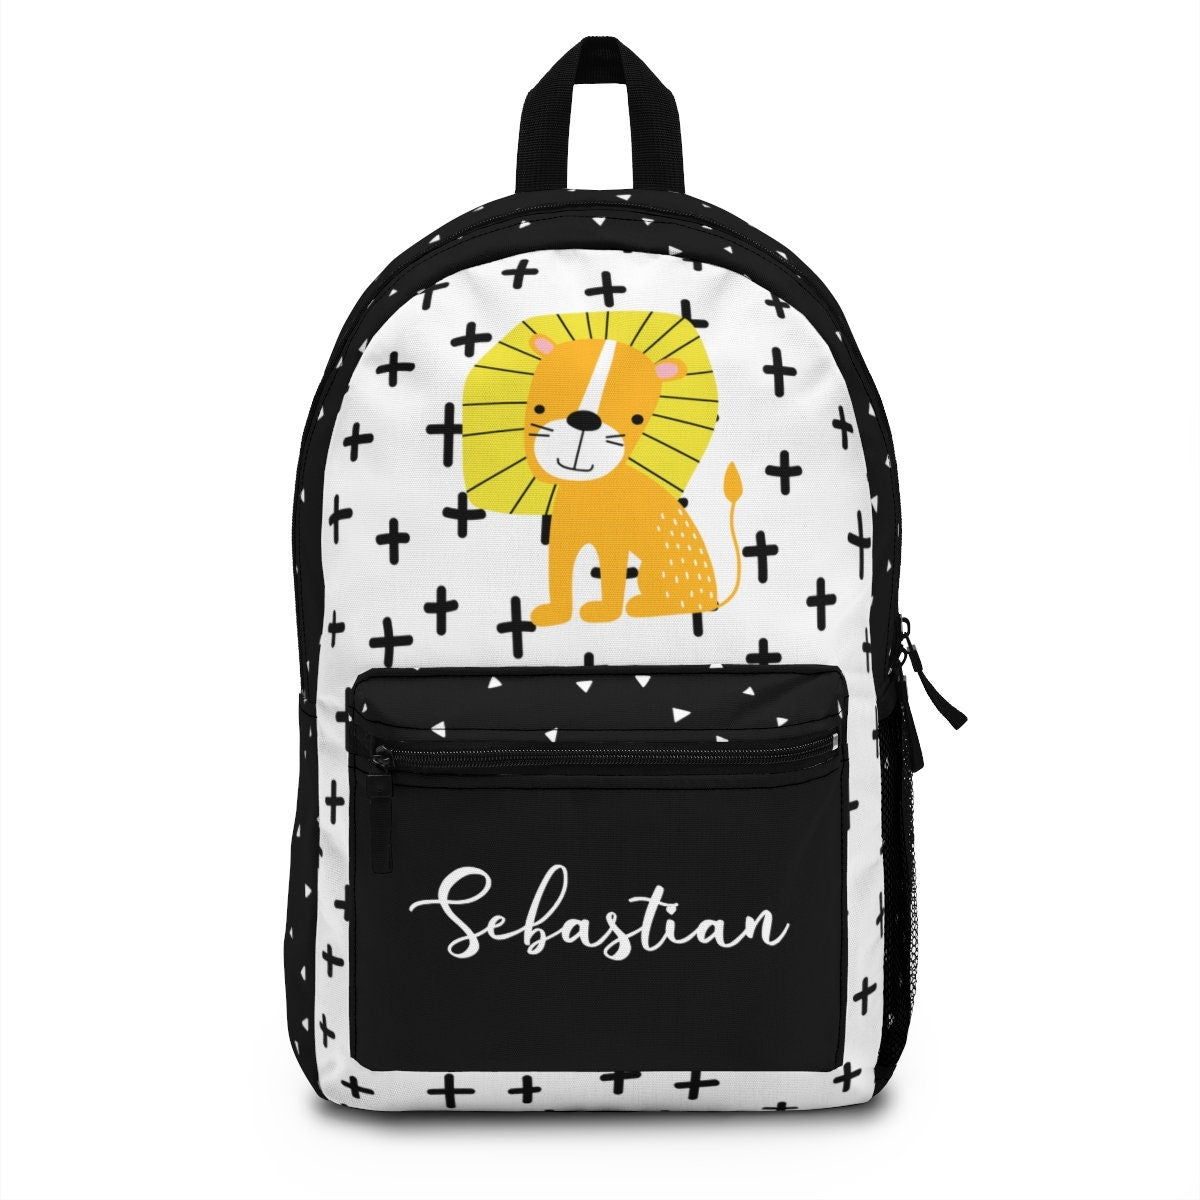 Lion Backpack (Made in USA), Backpack, School Bag, Personalied Backpack, Personalized School Bag, Personalized School Supply